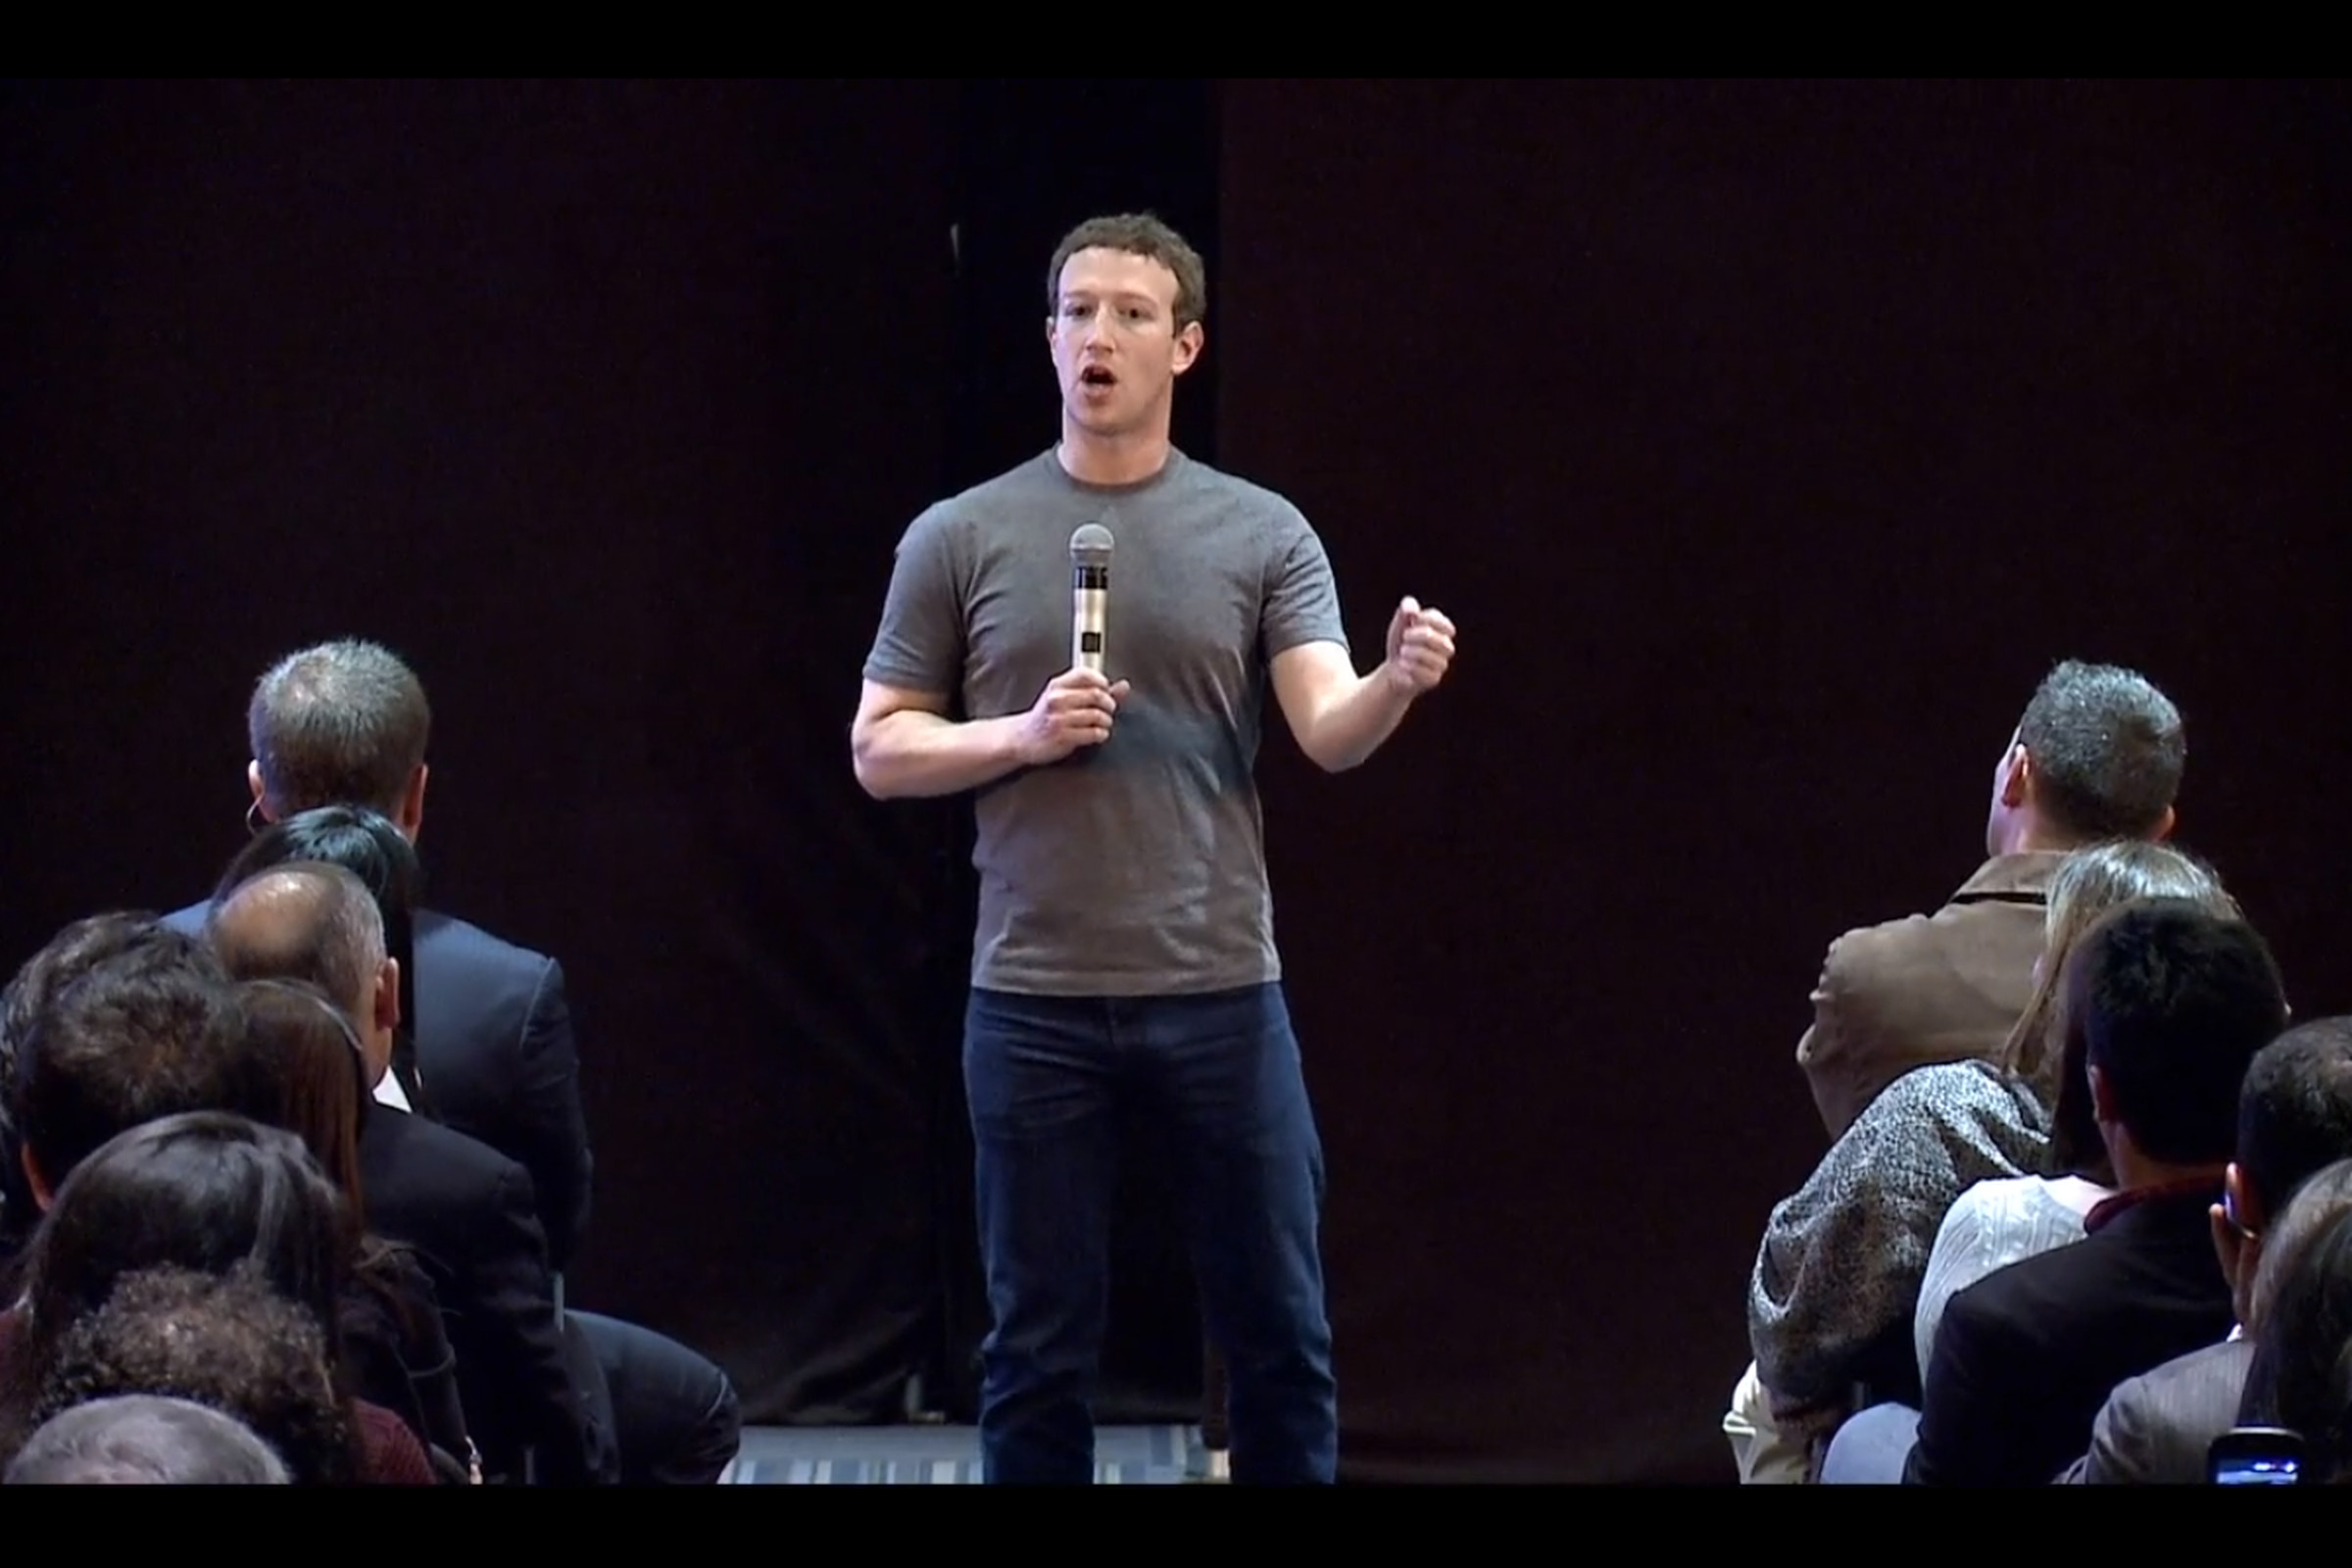 Mark Zuckerberg speaking at Facebook's third town hall event in Colombia.